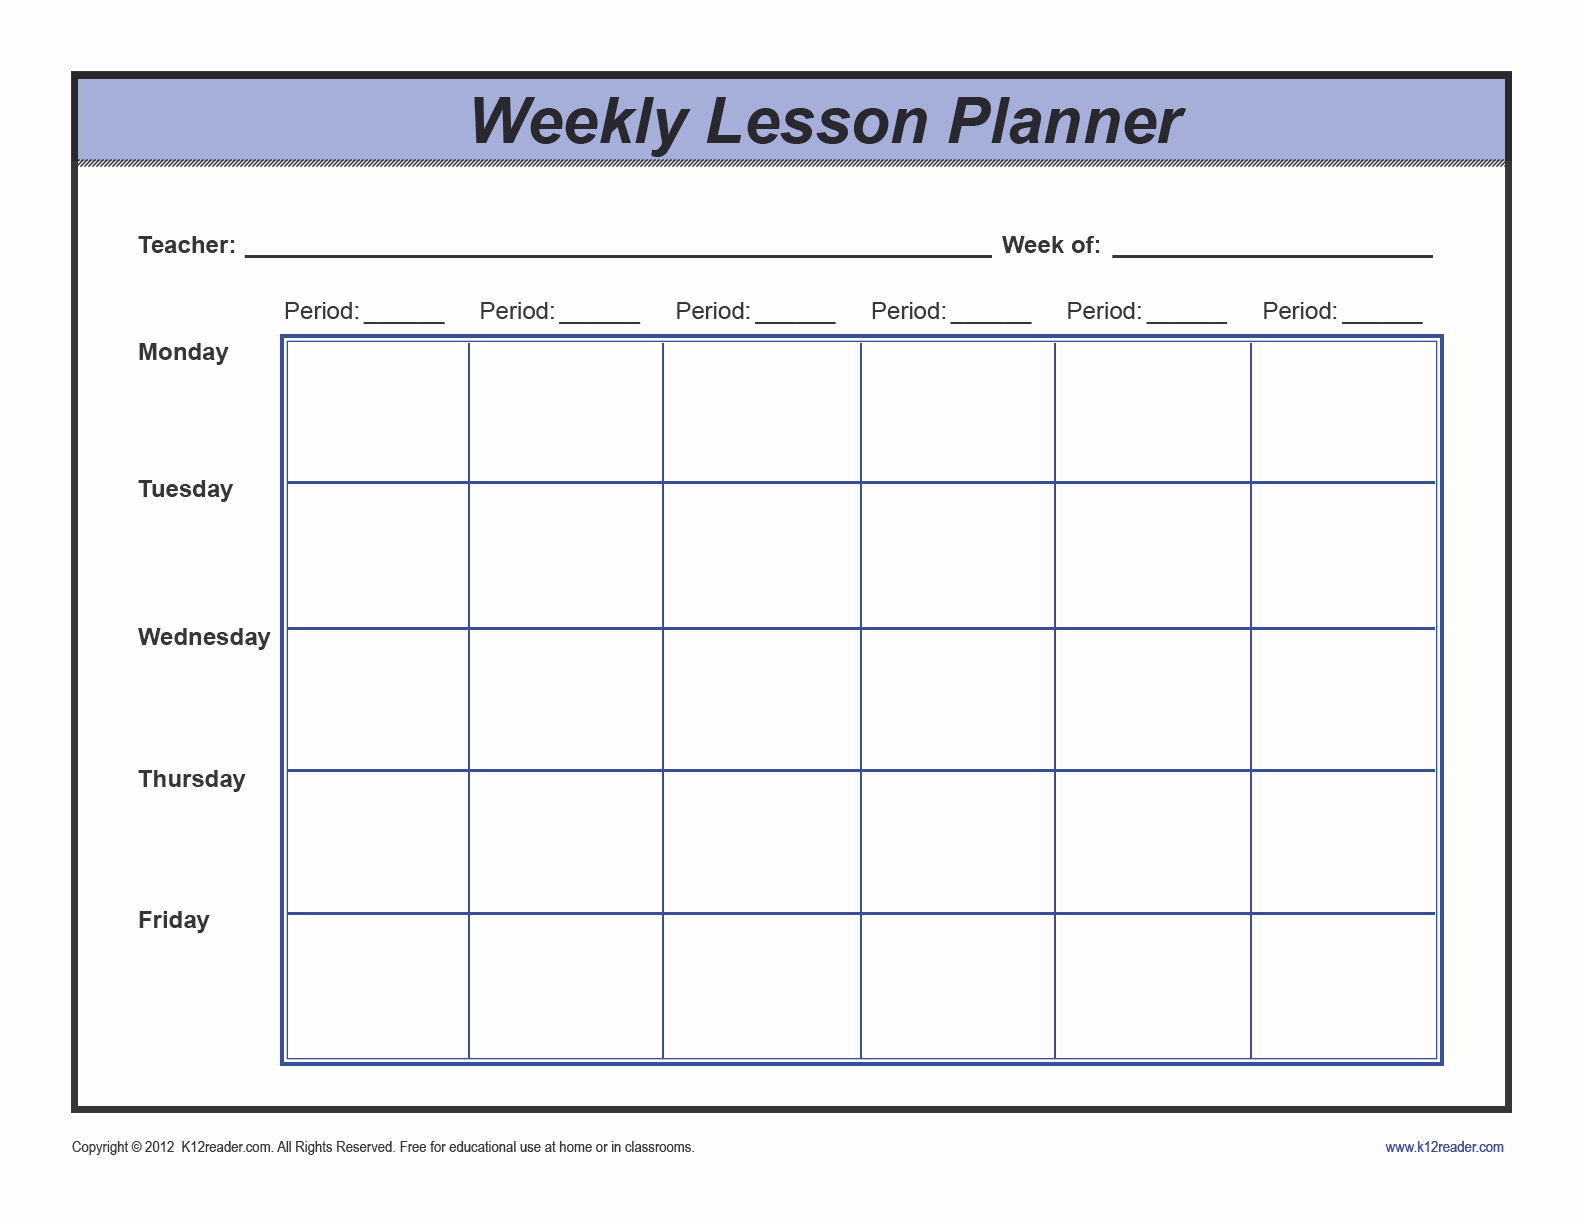 Week Lesson Plan Template Awesome Download Weekly Lesson Plan Template Preschool